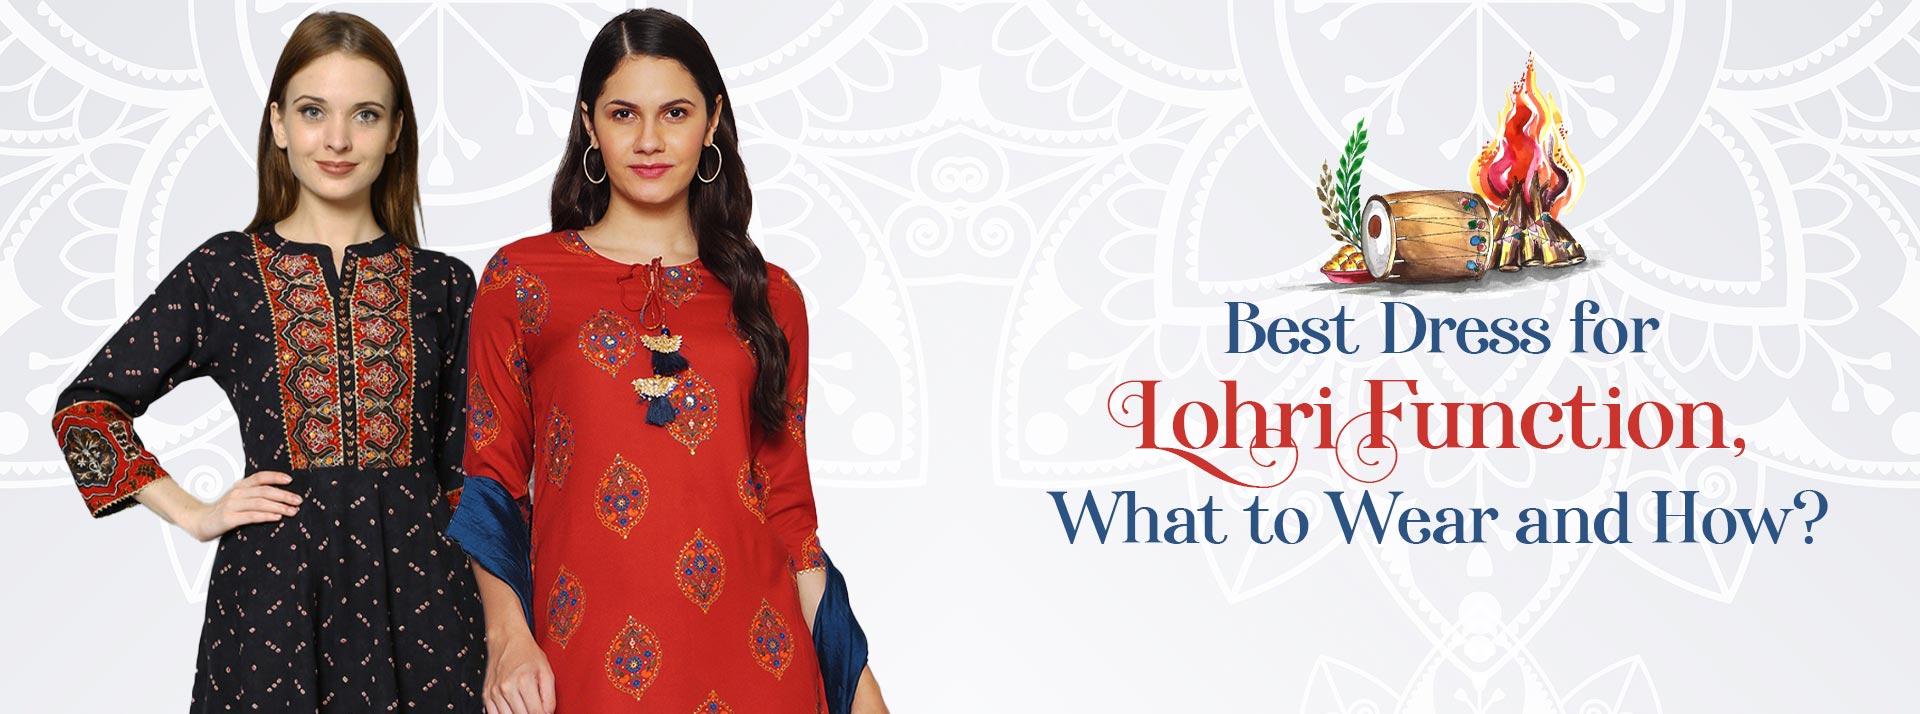 Best Dress for Lohri Function, What to Wear and How